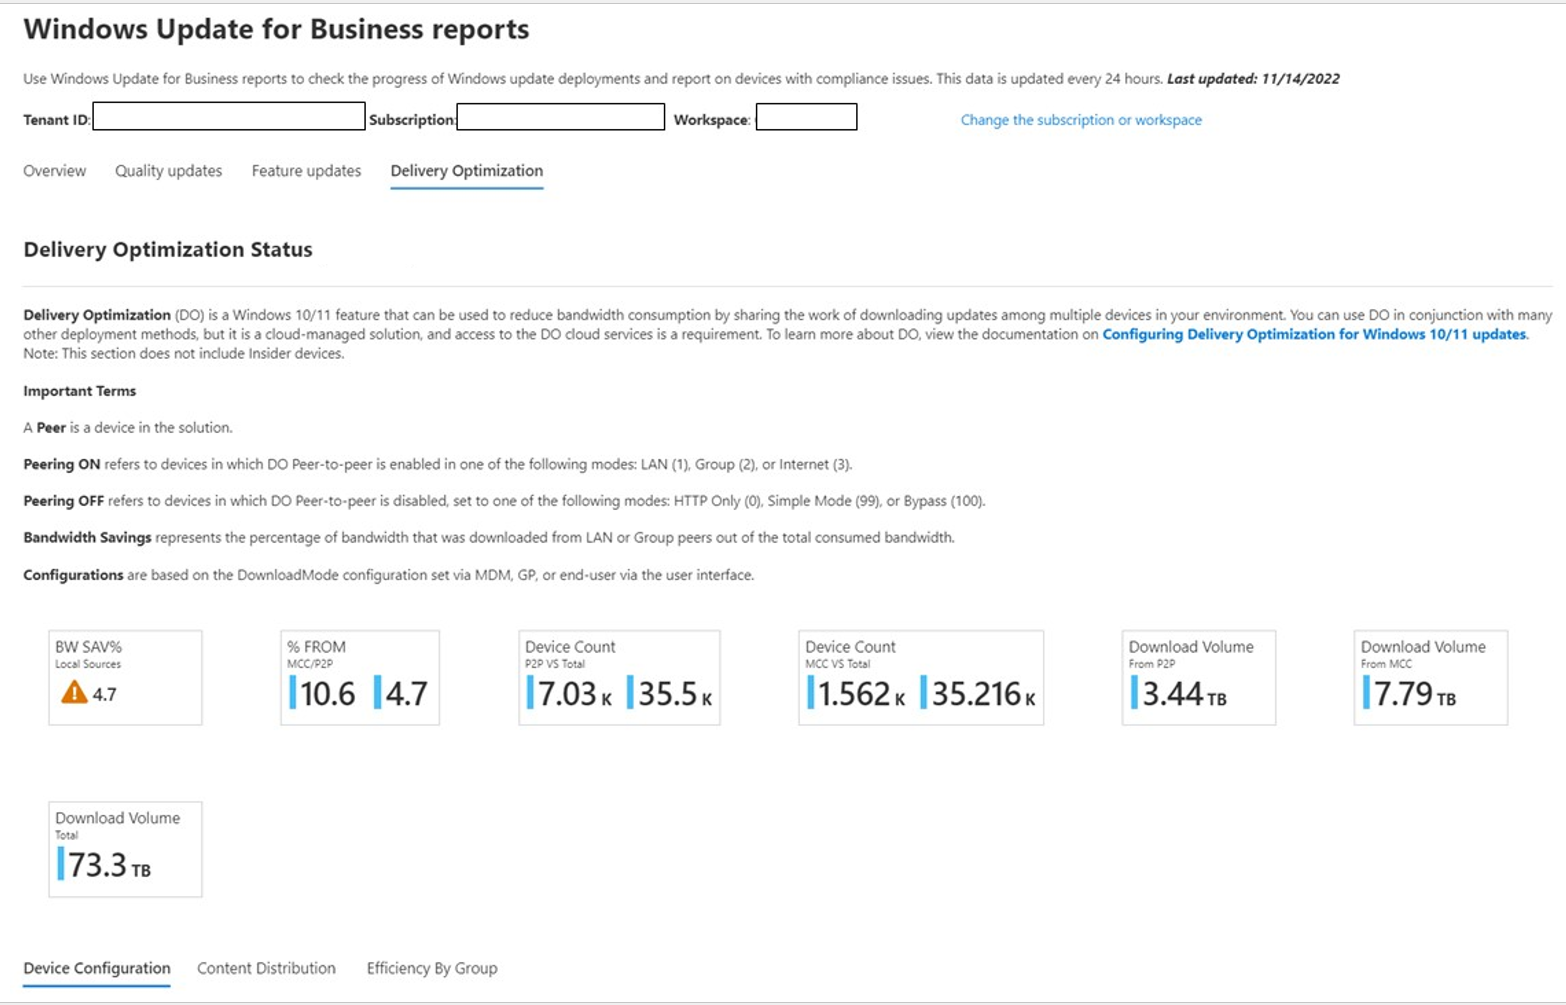 Screenshot of the summary tab in the Windows Update for Business reports workbook for Delivery Optimization.